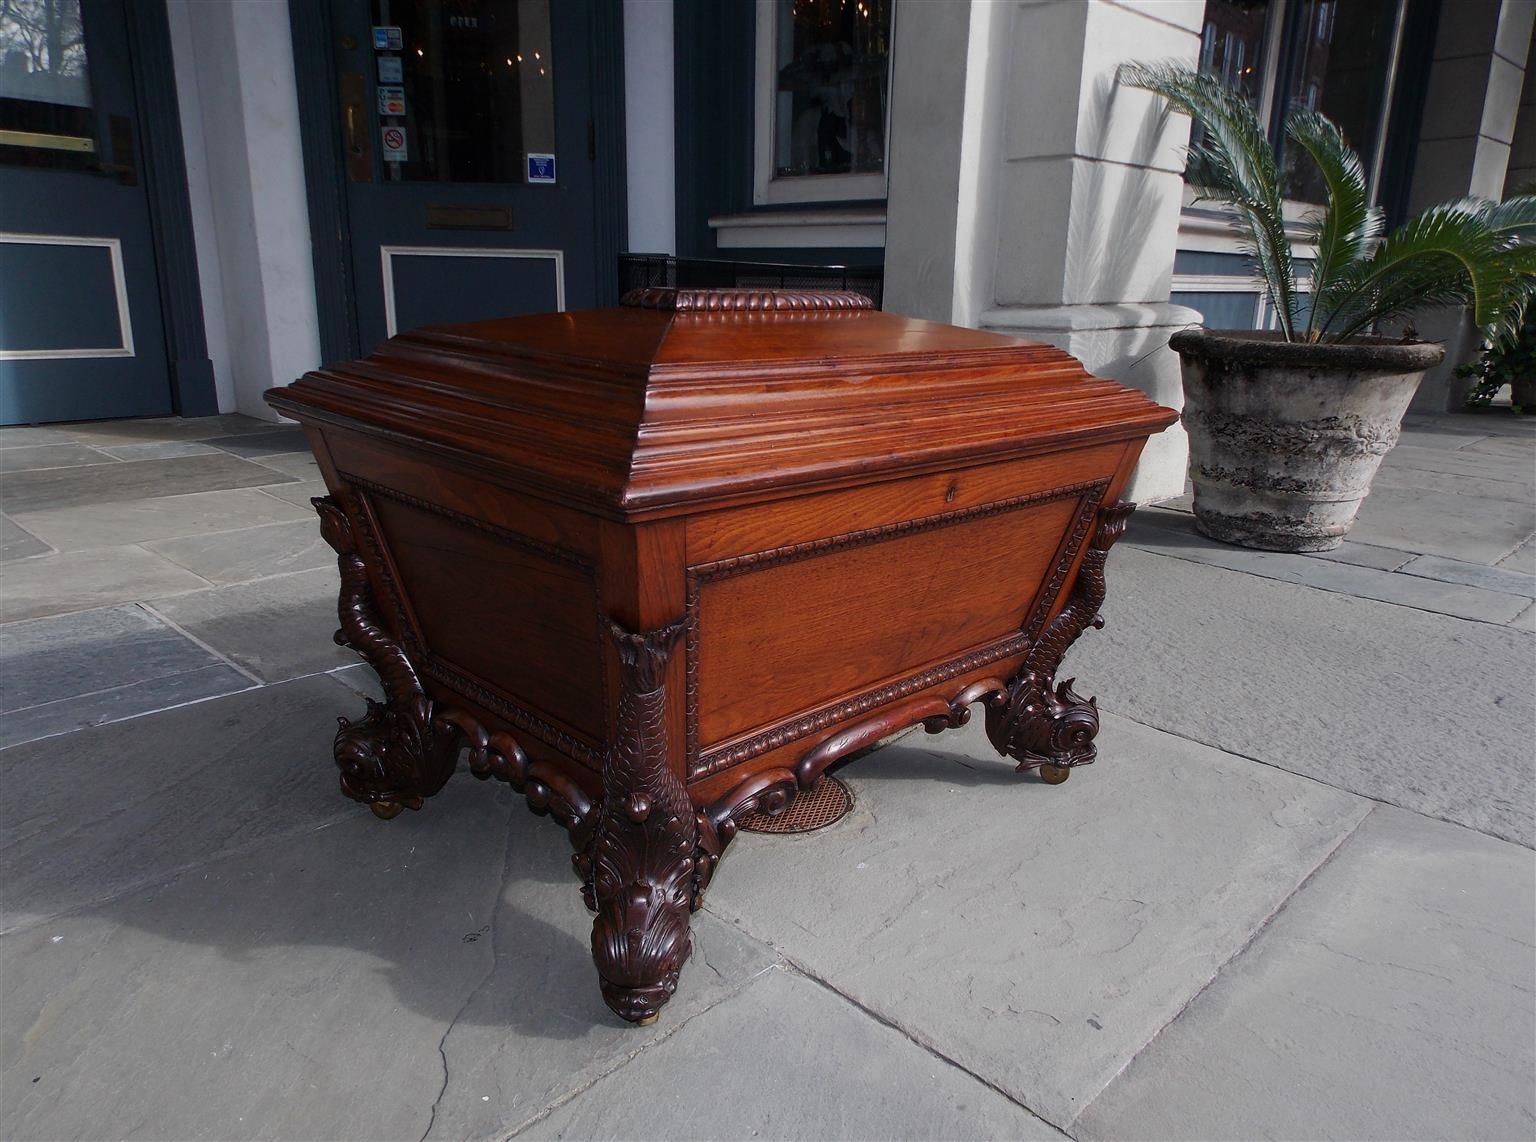 English Regency Mahogany monumental wine cellarette with a gadrooned step back hinged lid, canted gadrooned exterior sides, interior locking mechanism, flanking figural dolphin feet, carved scrolled decorative skirt, and resting on the original